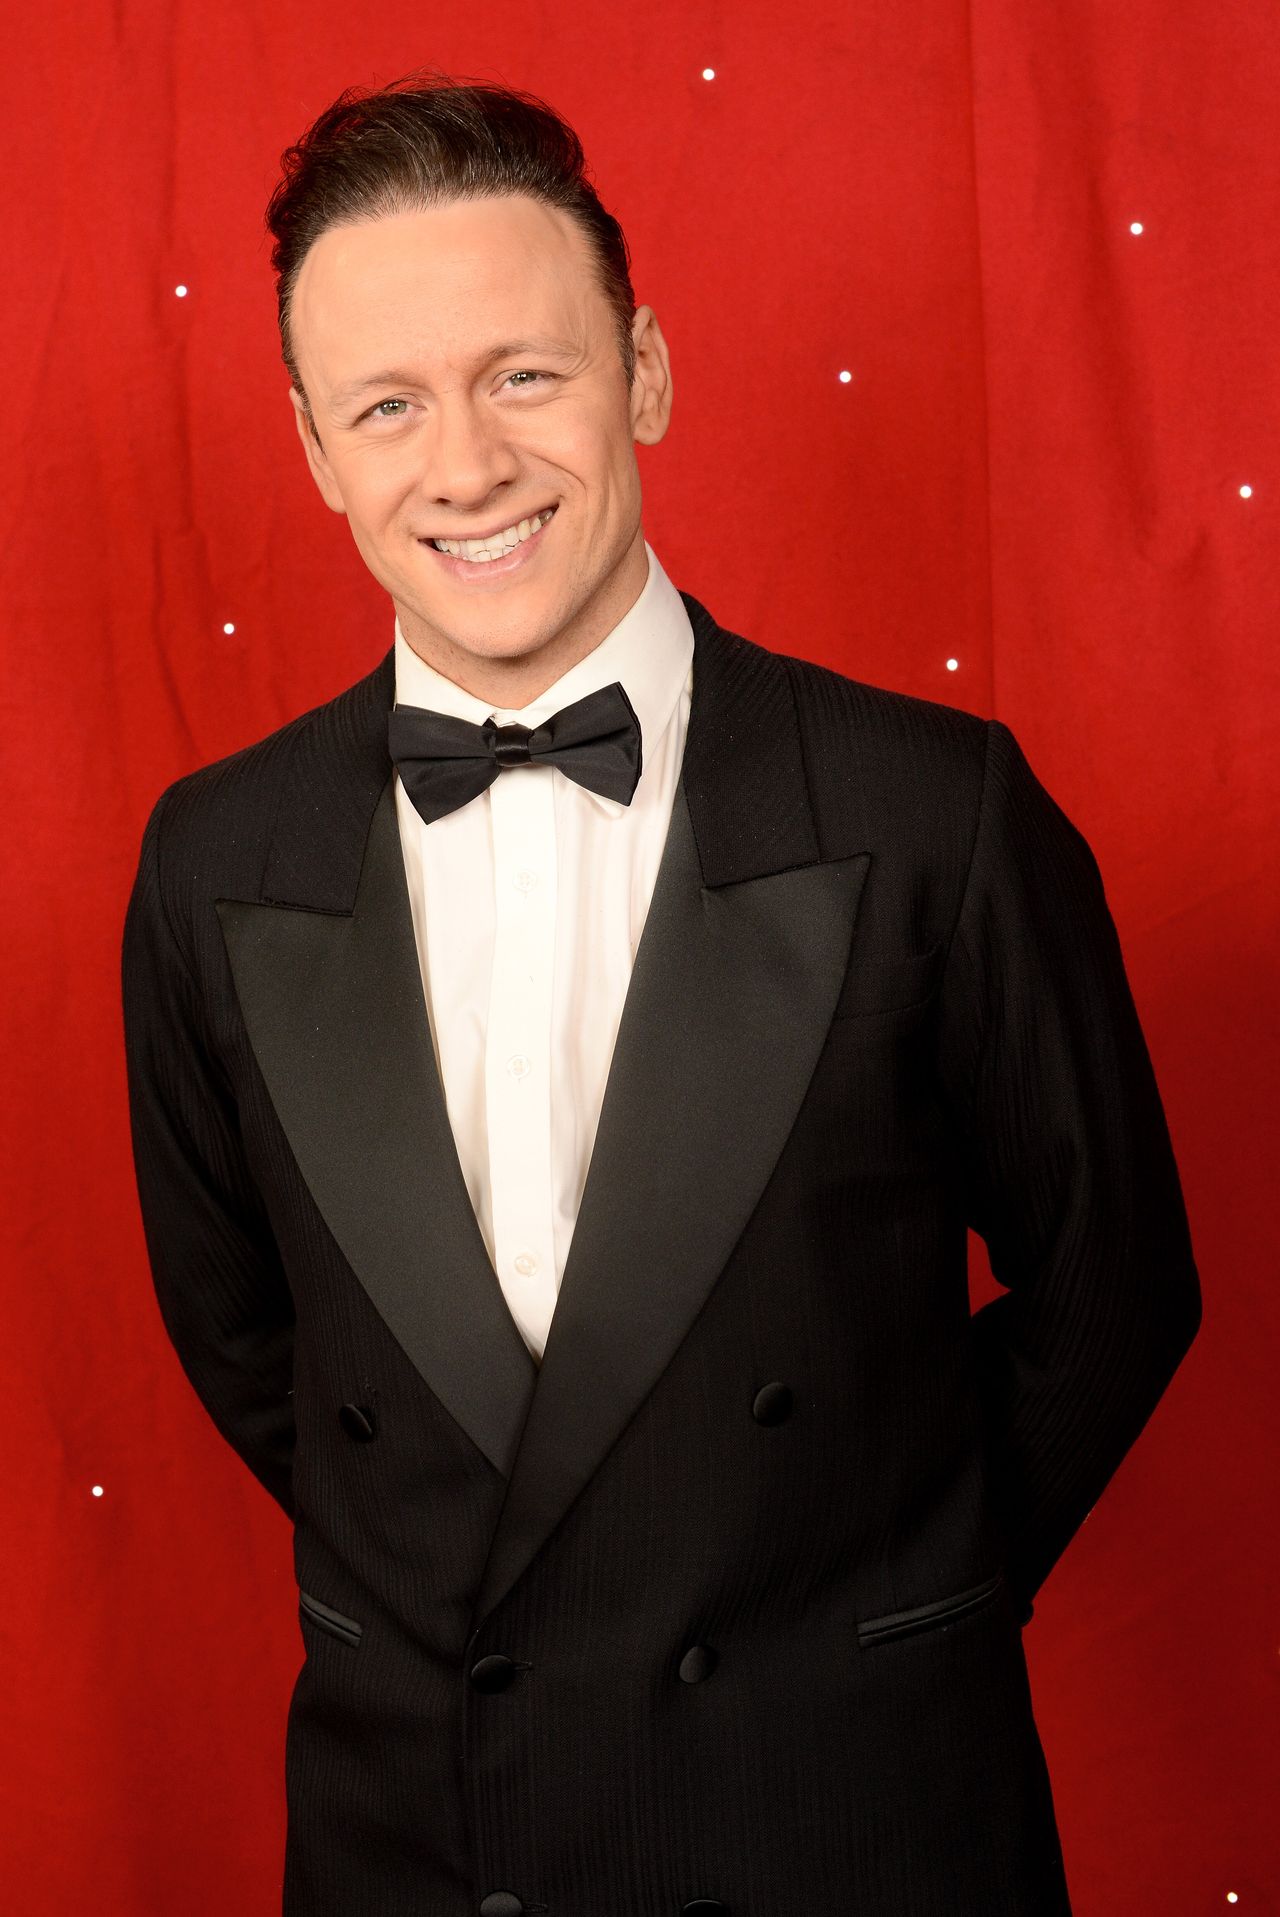 Kevin backstage at Strictly Come Dancing Live! in 2018